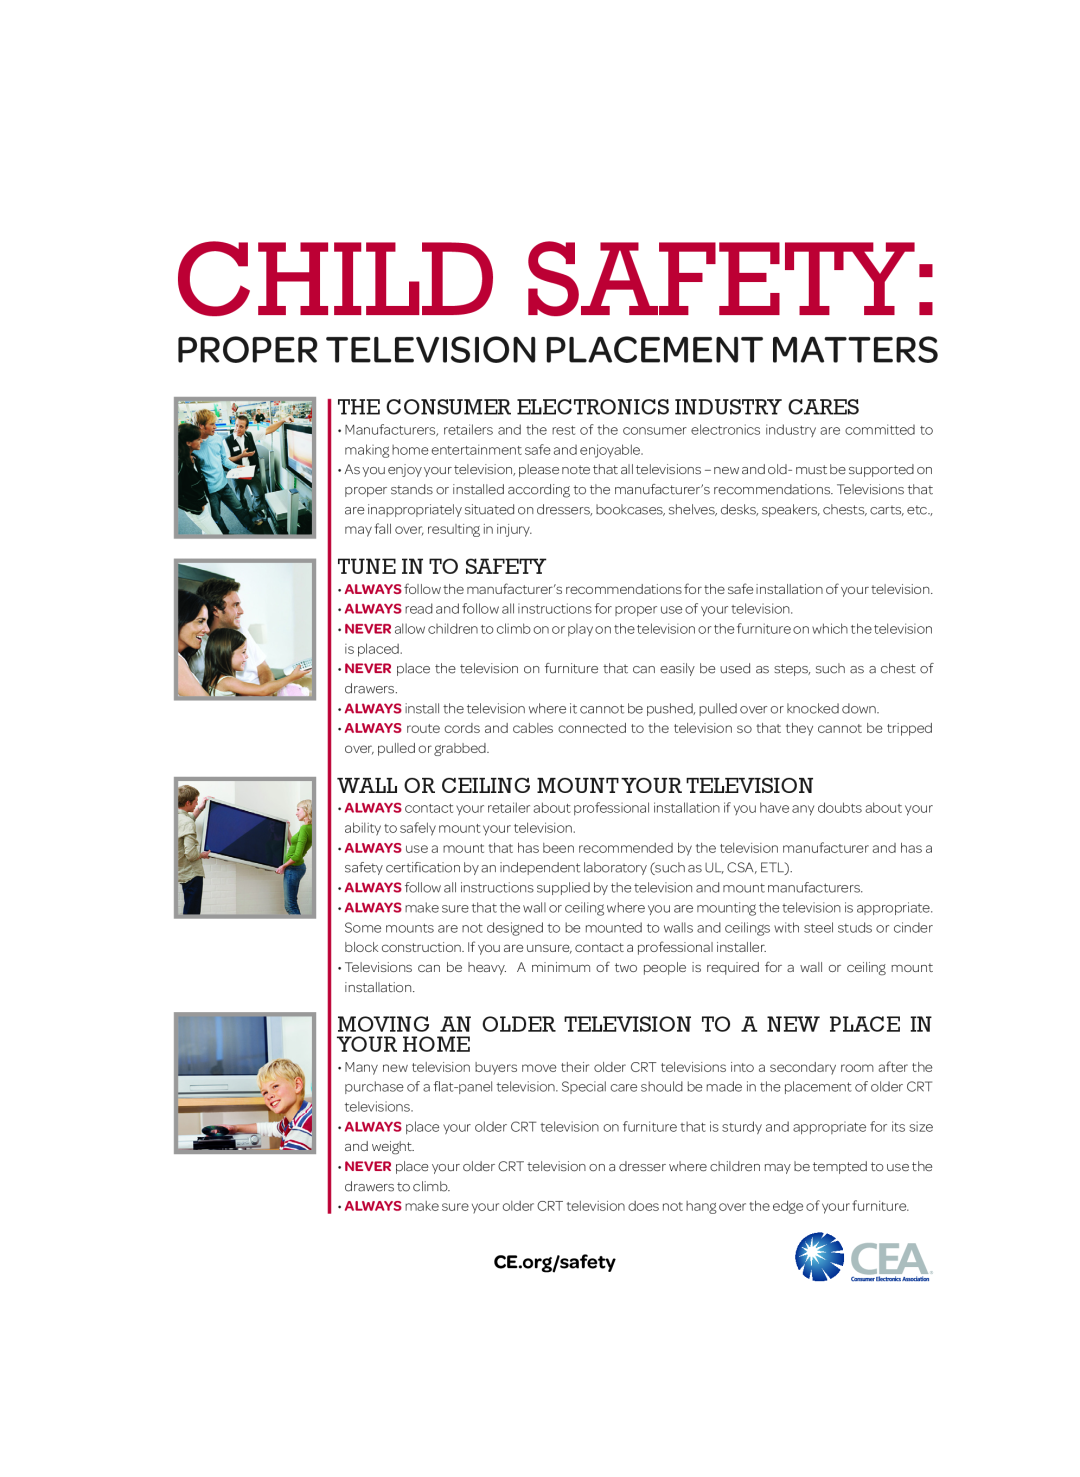 LG Electronics 50LB6300 Child Safety, Proper Television Placement Matters, The Consumer Electronics Industry Cares 